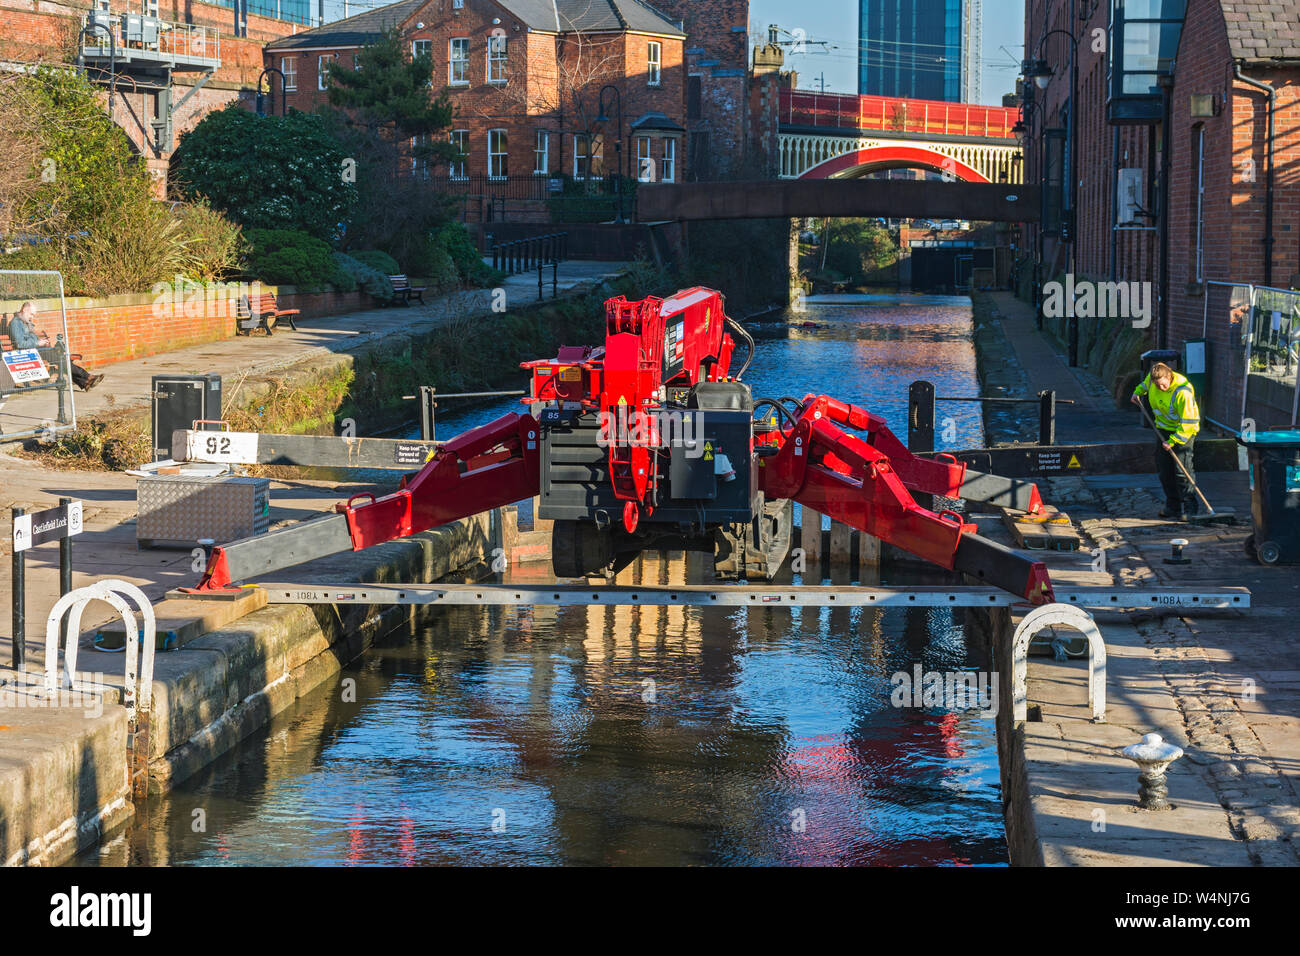 UNIC URW-706 Mini Spider Crane astride lock 92 on the Rochdale canal, at its junction with the Bridgewater canal, Castlefield, Manchester, England, UK Stock Photo